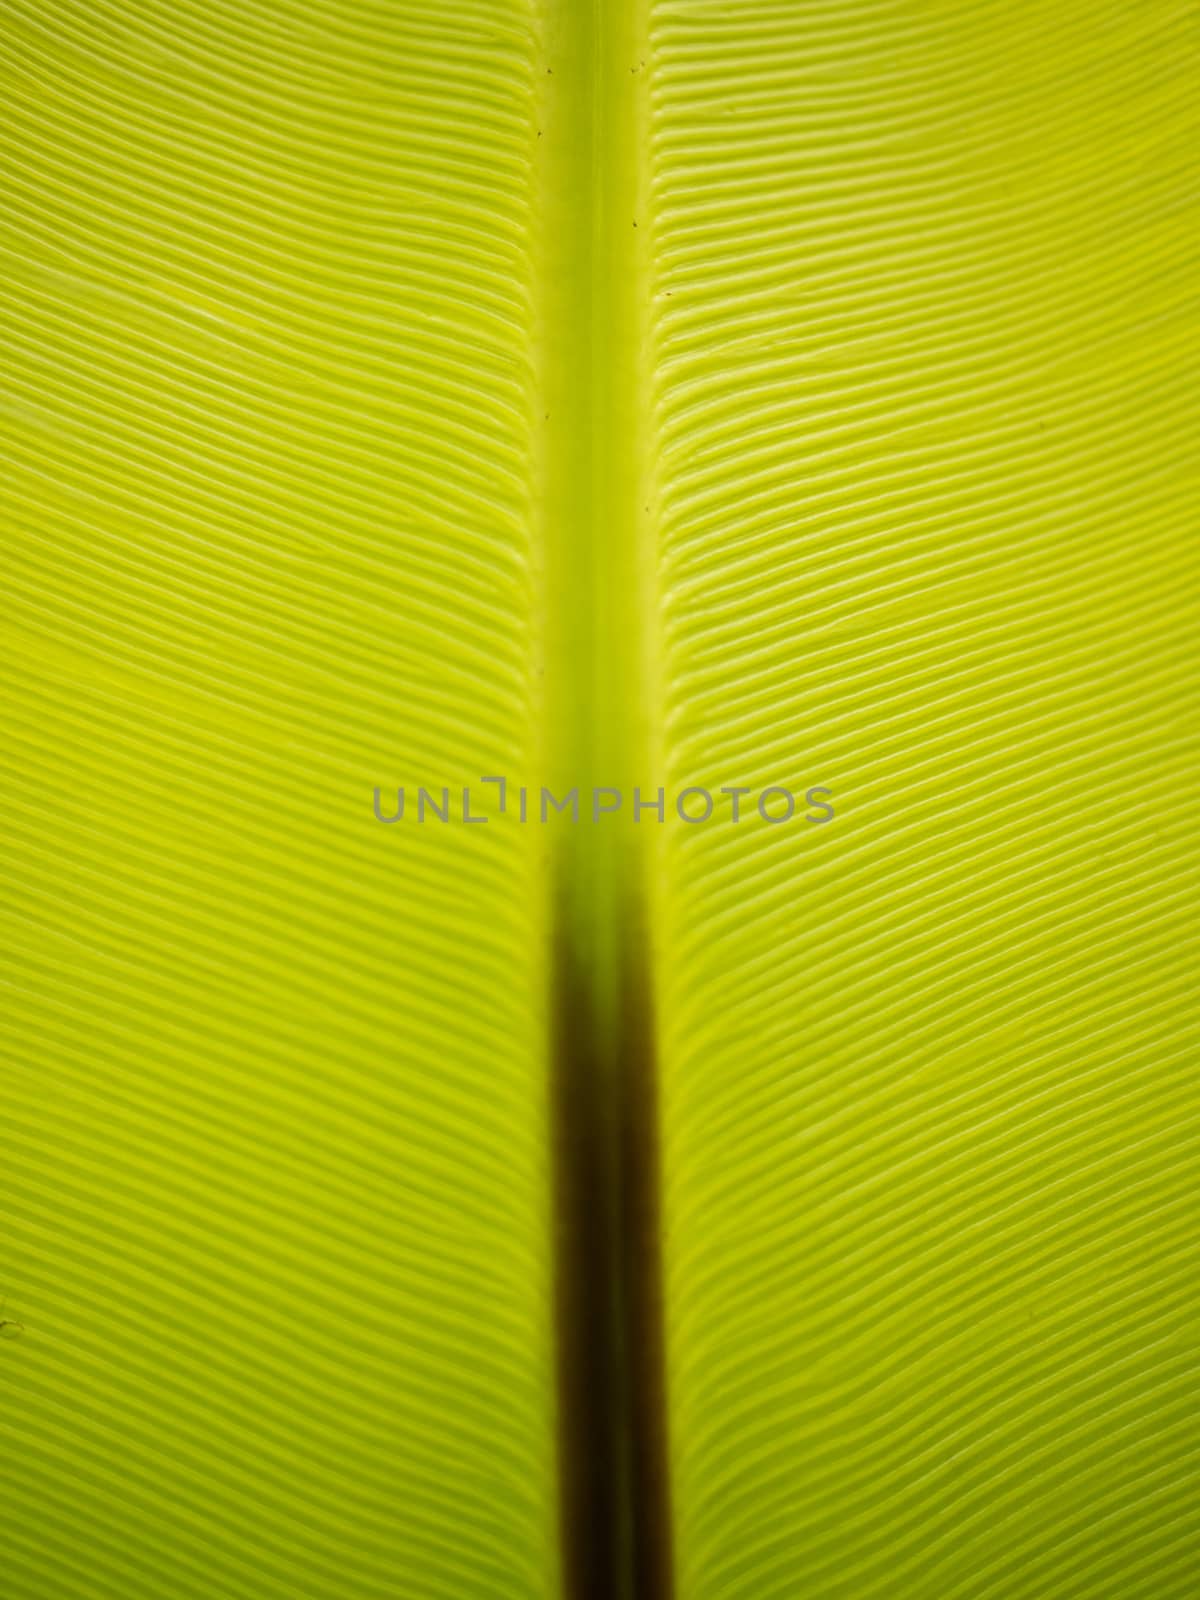 Looking up through a tropical green leaf